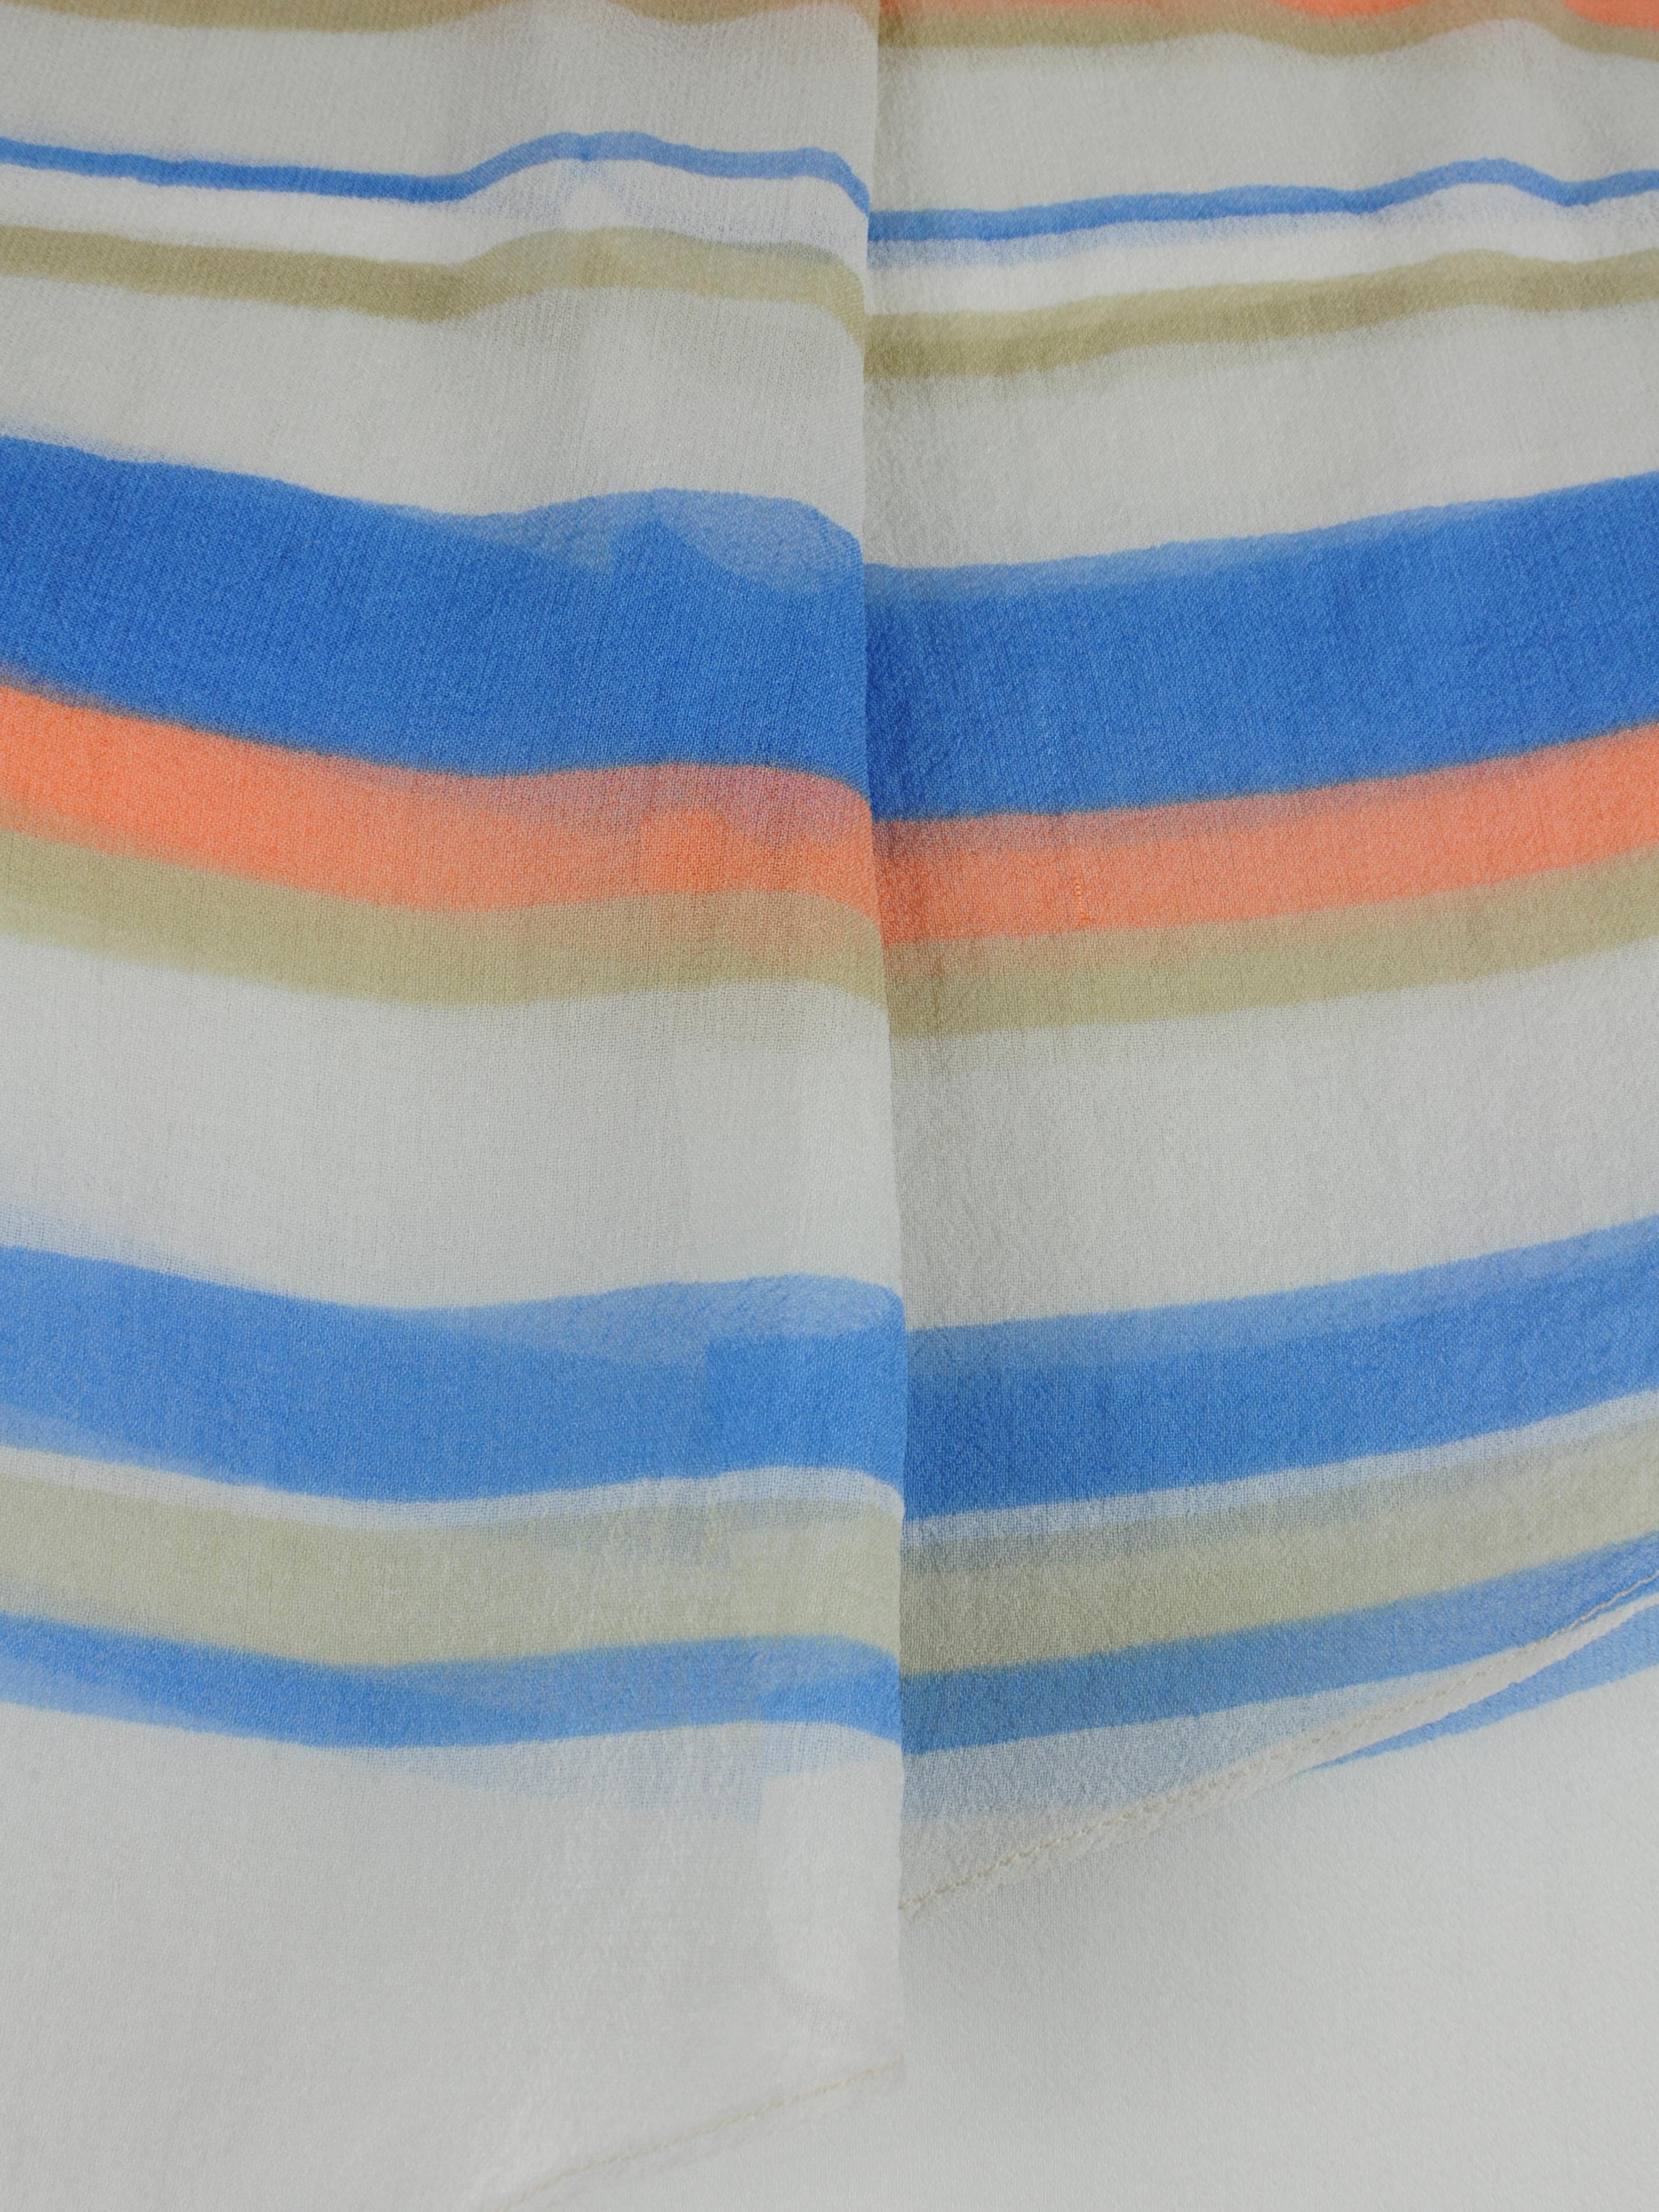 Christian Dior Silk Striped Blouse with Volant Detail by Marc Bohan 1970s For Sale 4